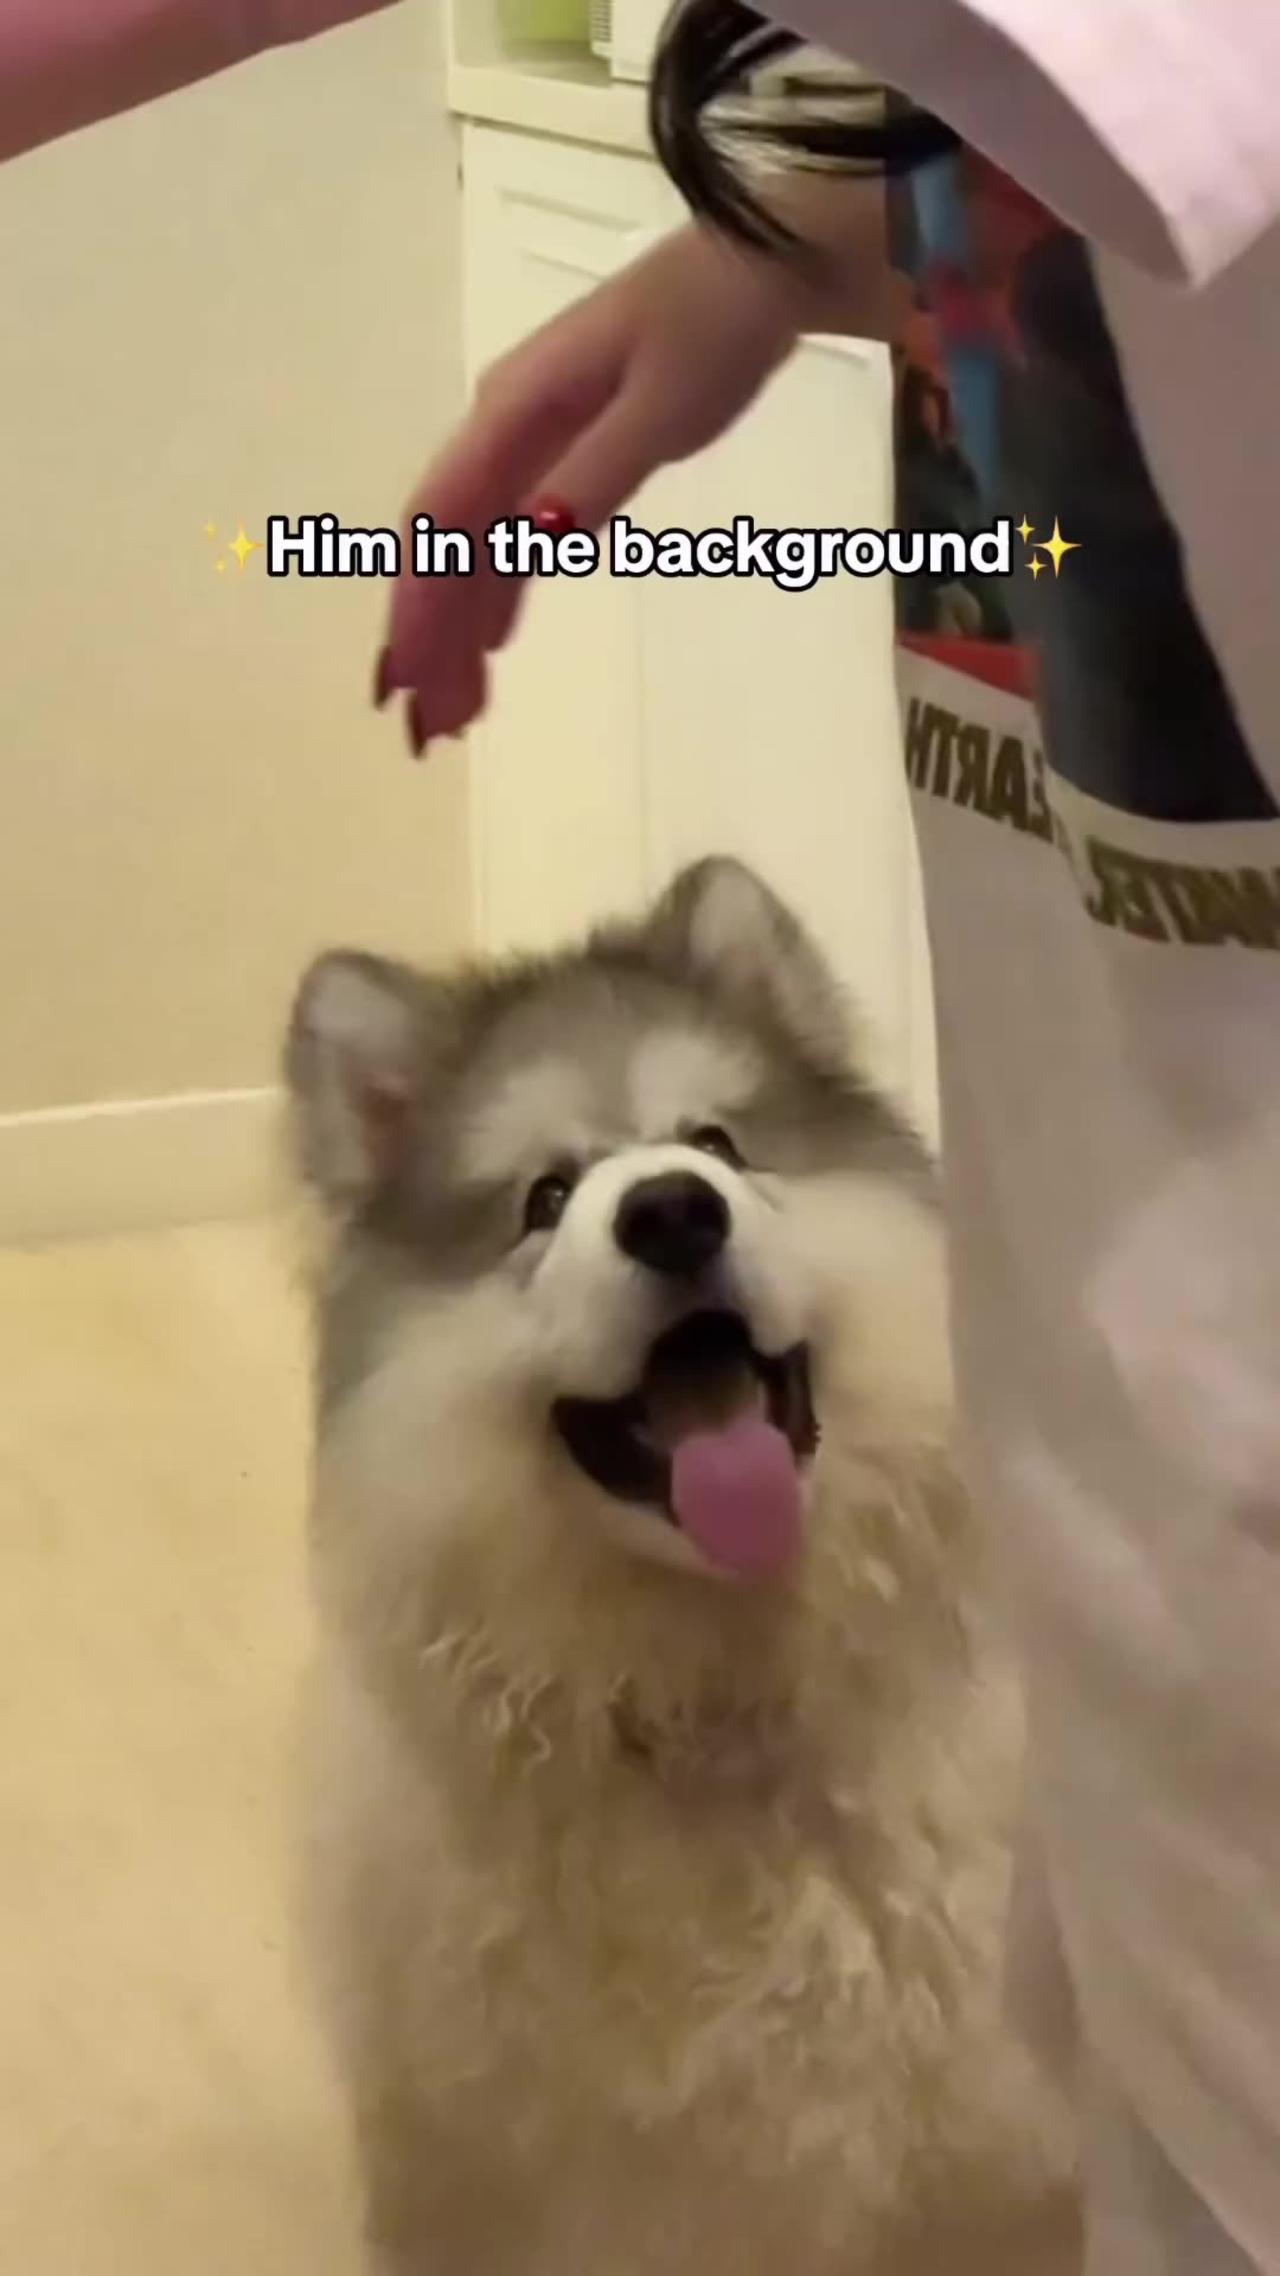 "Adorable Husky Patiently Waits for Dinner Time"